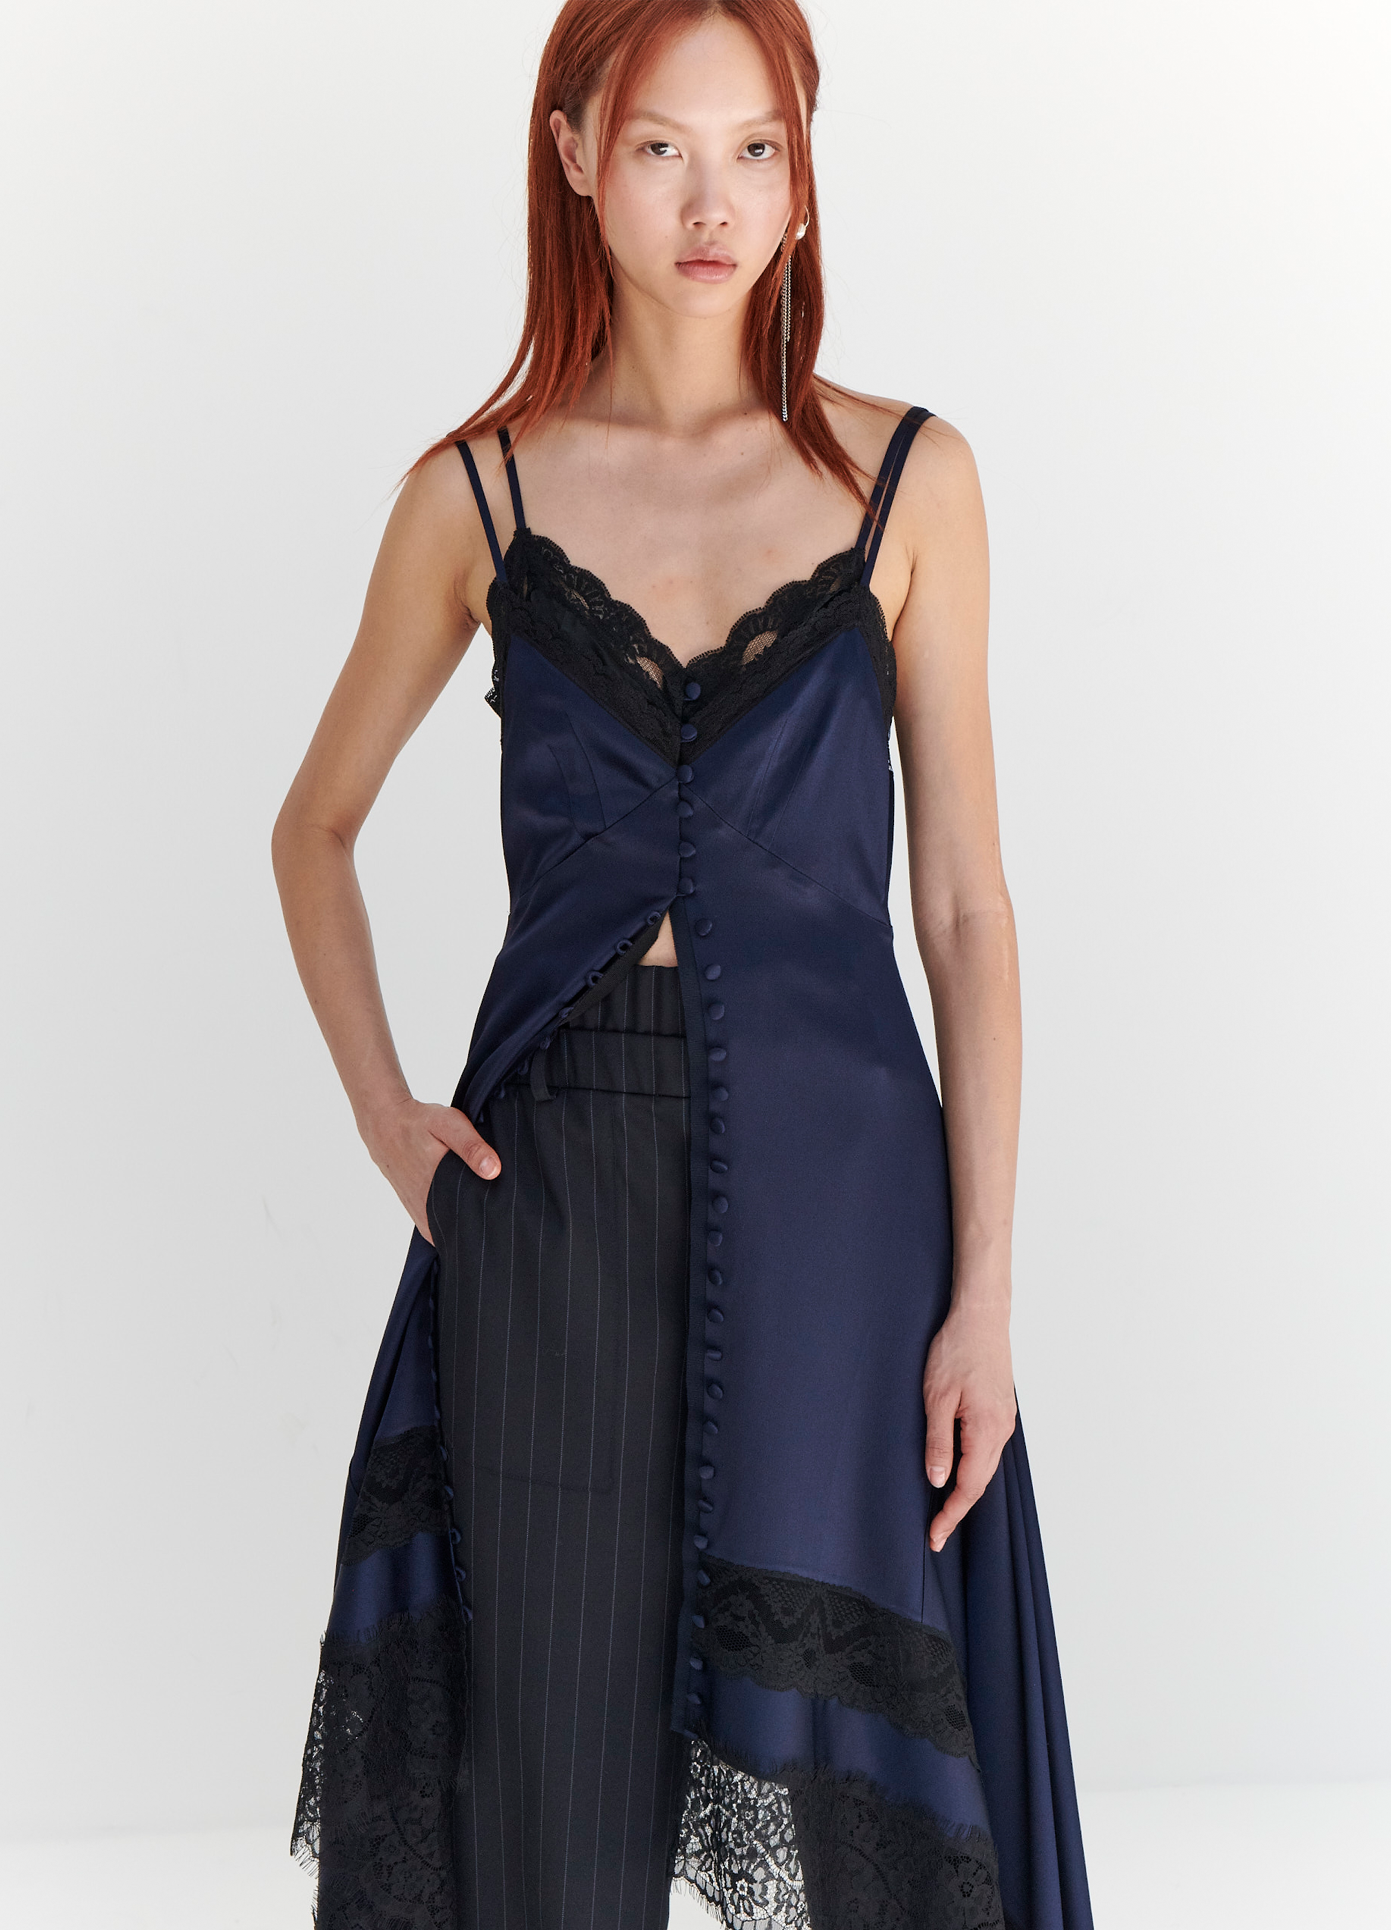 MONSE Lace Trim Slip Dress in Midnight on model front view